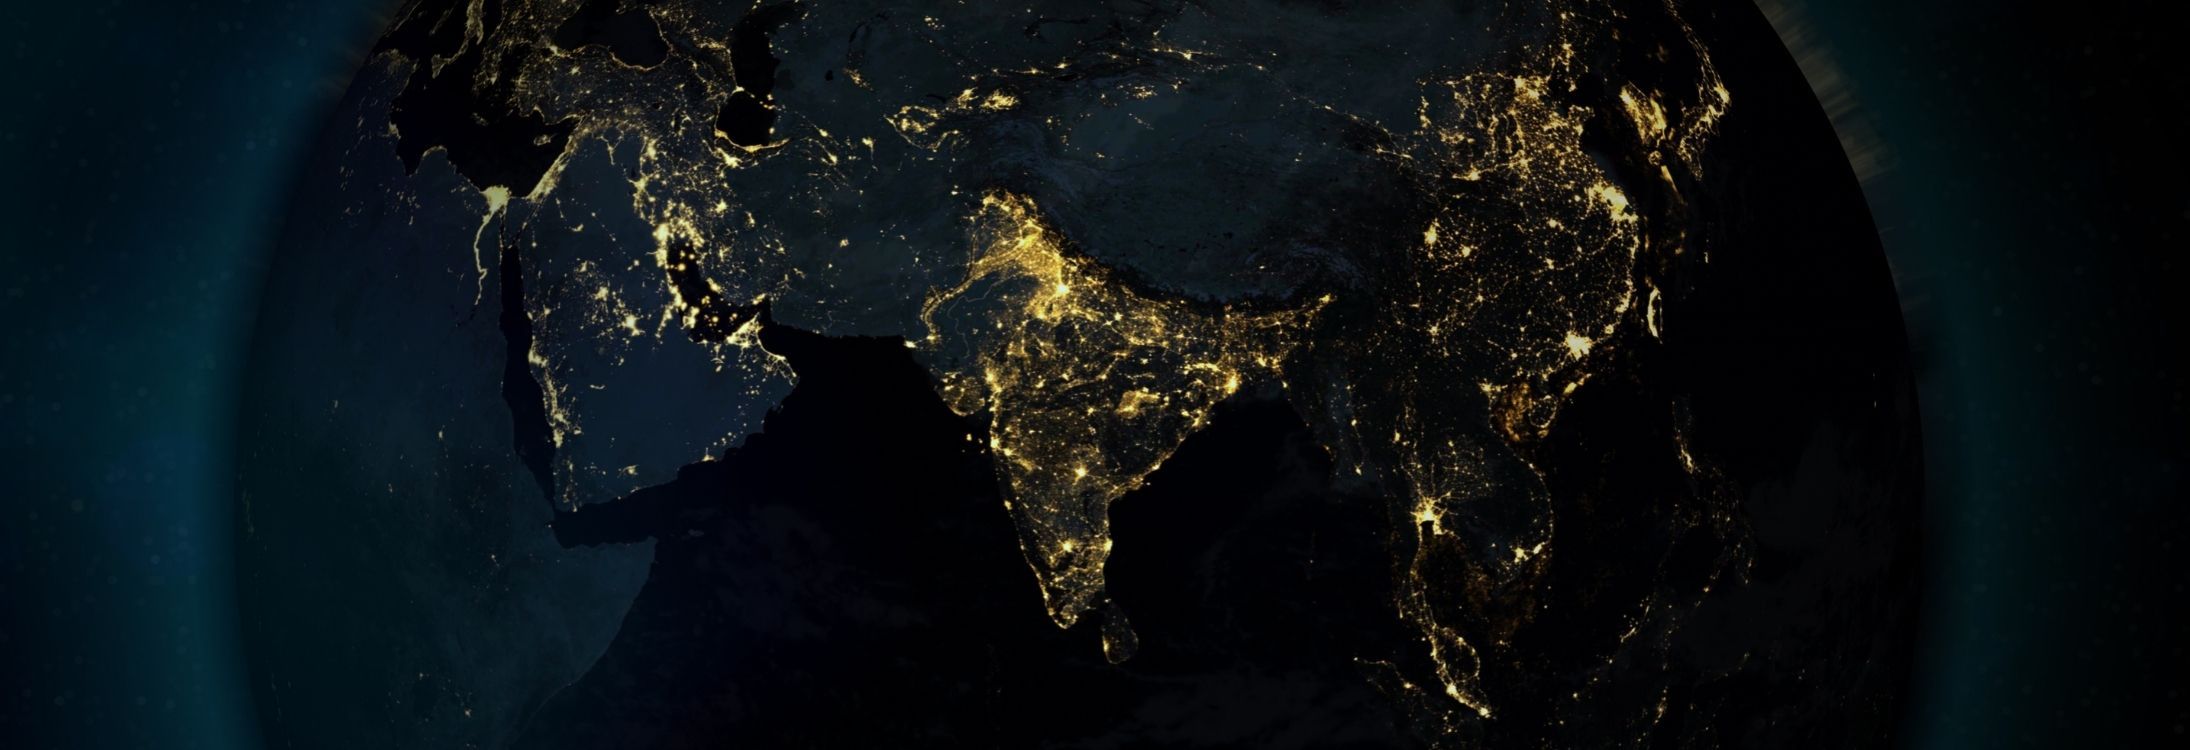 This is how India looks at night from outer space